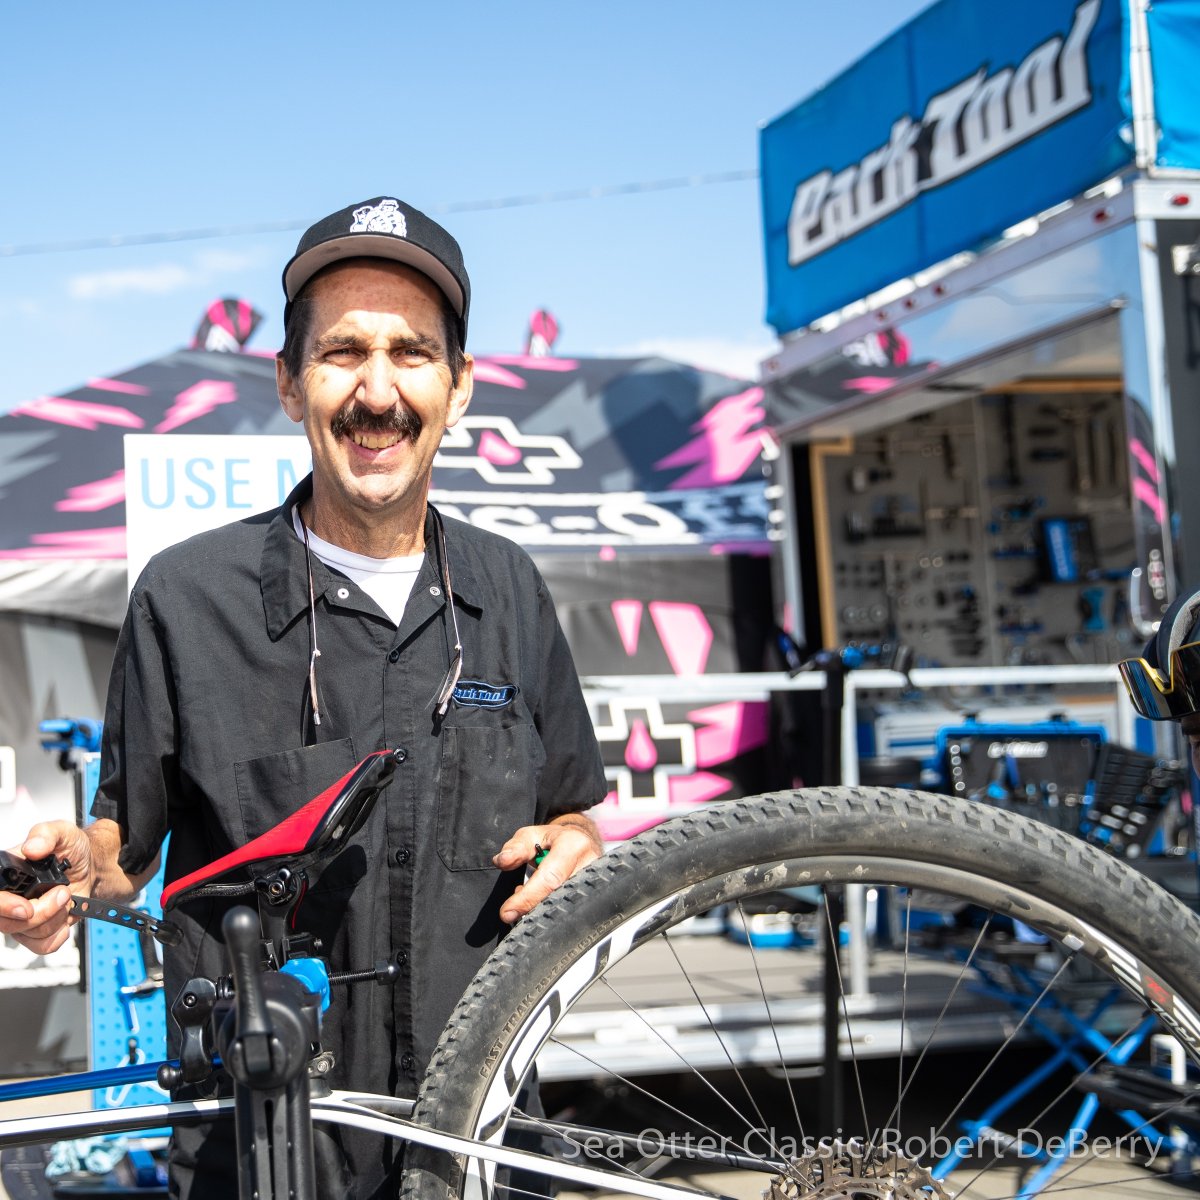 Mechanic Monday. Is there such a thing? Well, there should be. @parktoolblue

#seaotterclassic #loveyourlife #bikemechanics #bikelove #mtb #bikelife #parktoolblue